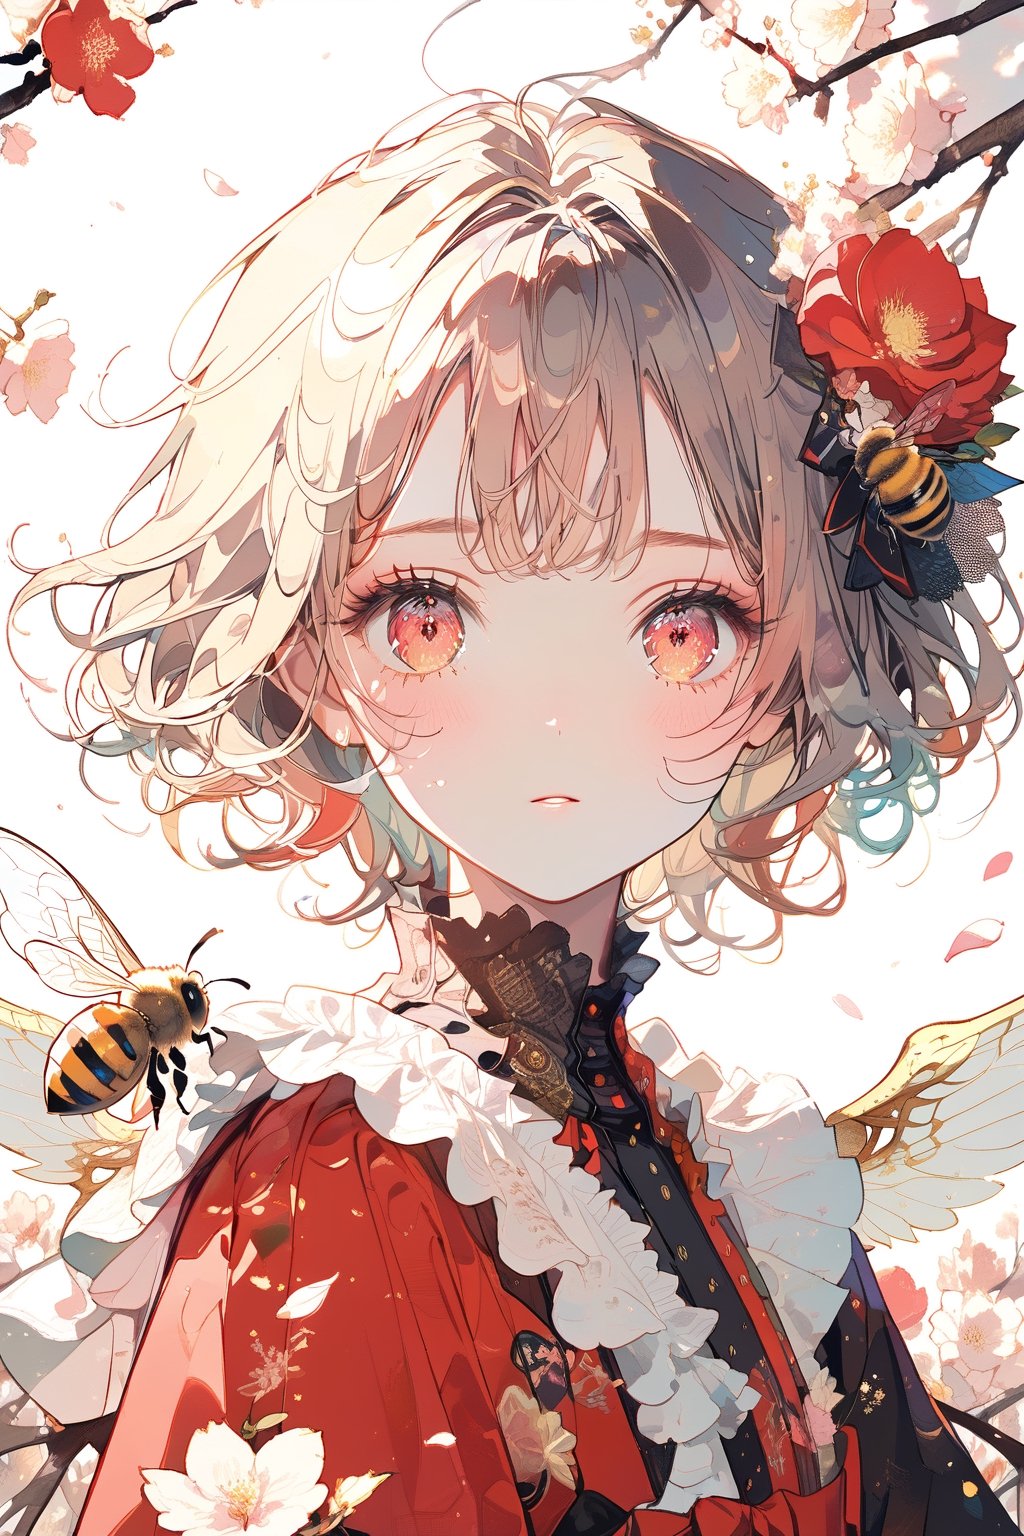 //quality, (masterpiece:1.4), (detailed), ((,best quality,)),//, cloes-up portrait,1girl,solo,loli,bee_girl,//, red hair, short hair,antenna_hair,sidelocks,hair_flowers, beautiful detailed eyes,glowing eyes,red eyes,//,(sparking bee_wings:1.3),red_dress,
,//, blush,expressionless,looking_at_viewer, first-person_view,//,,//, scenery, outdoors, flower_petals,flying_petals, flowers petals floating in air,((bees)), (straight-on:1.3),//,emo,aesthetic